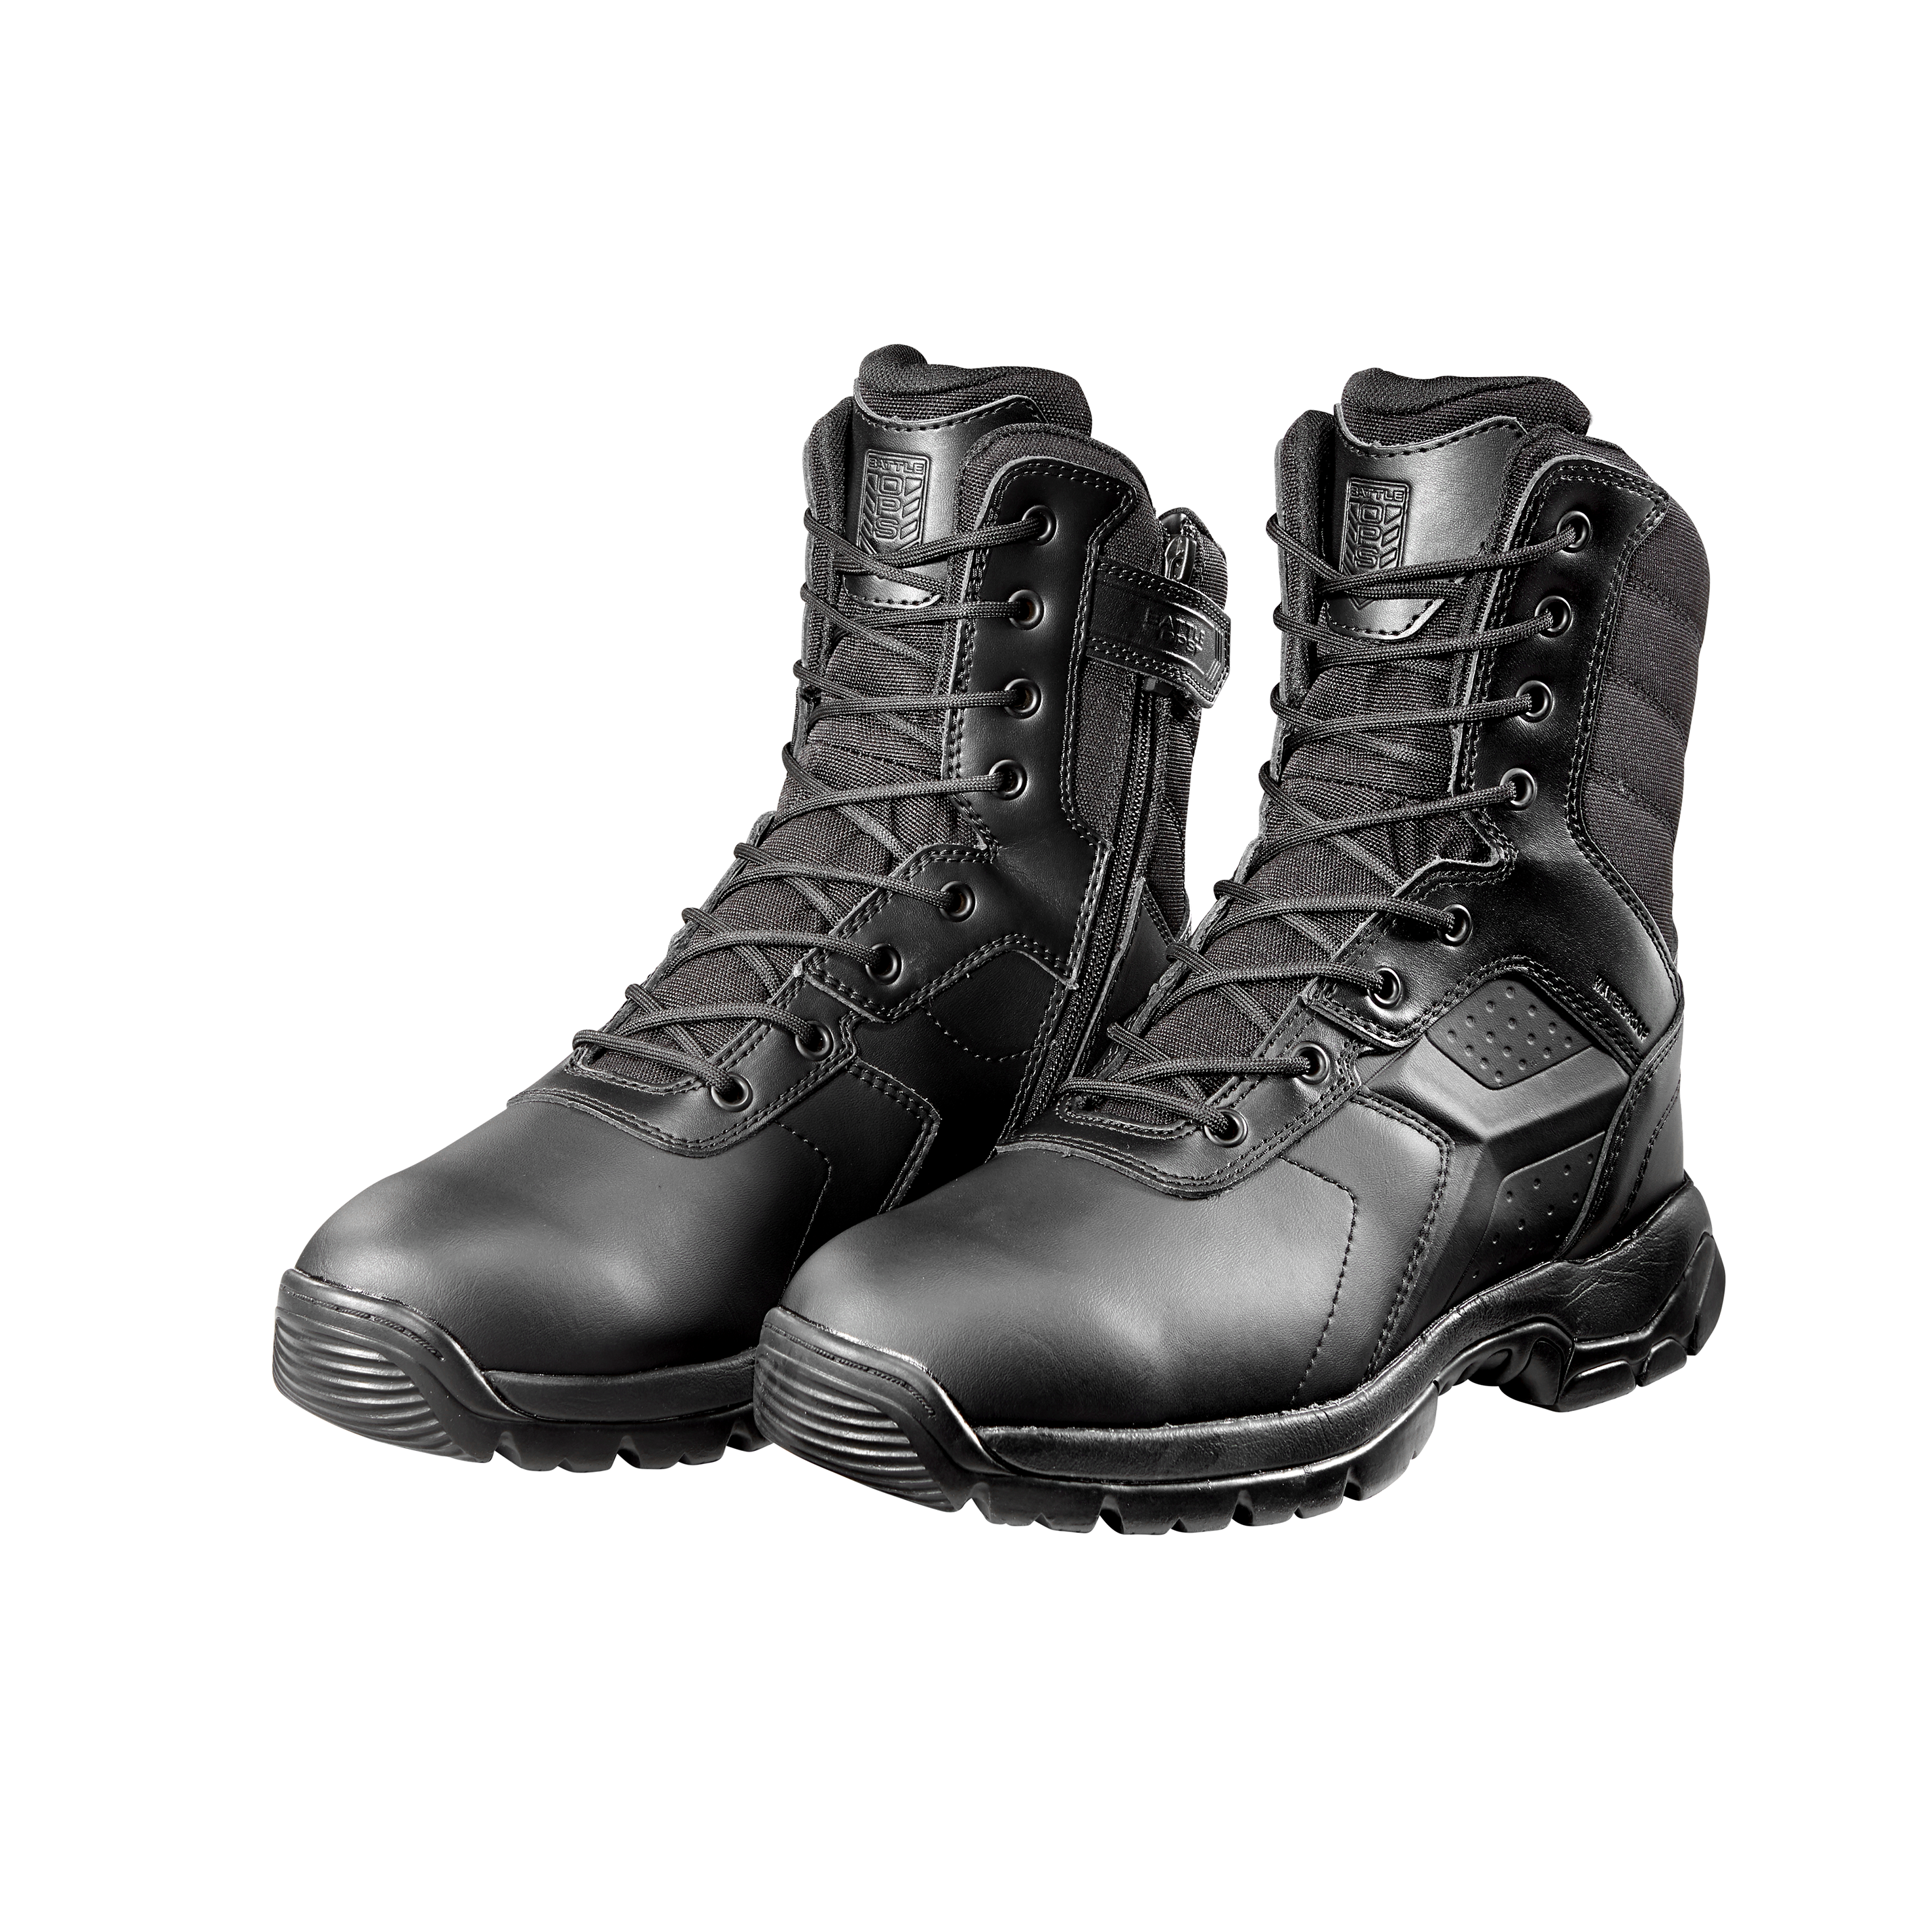 8-inch Waterproof Black Tactical Boot - Side Zip & Comp Safety Toe